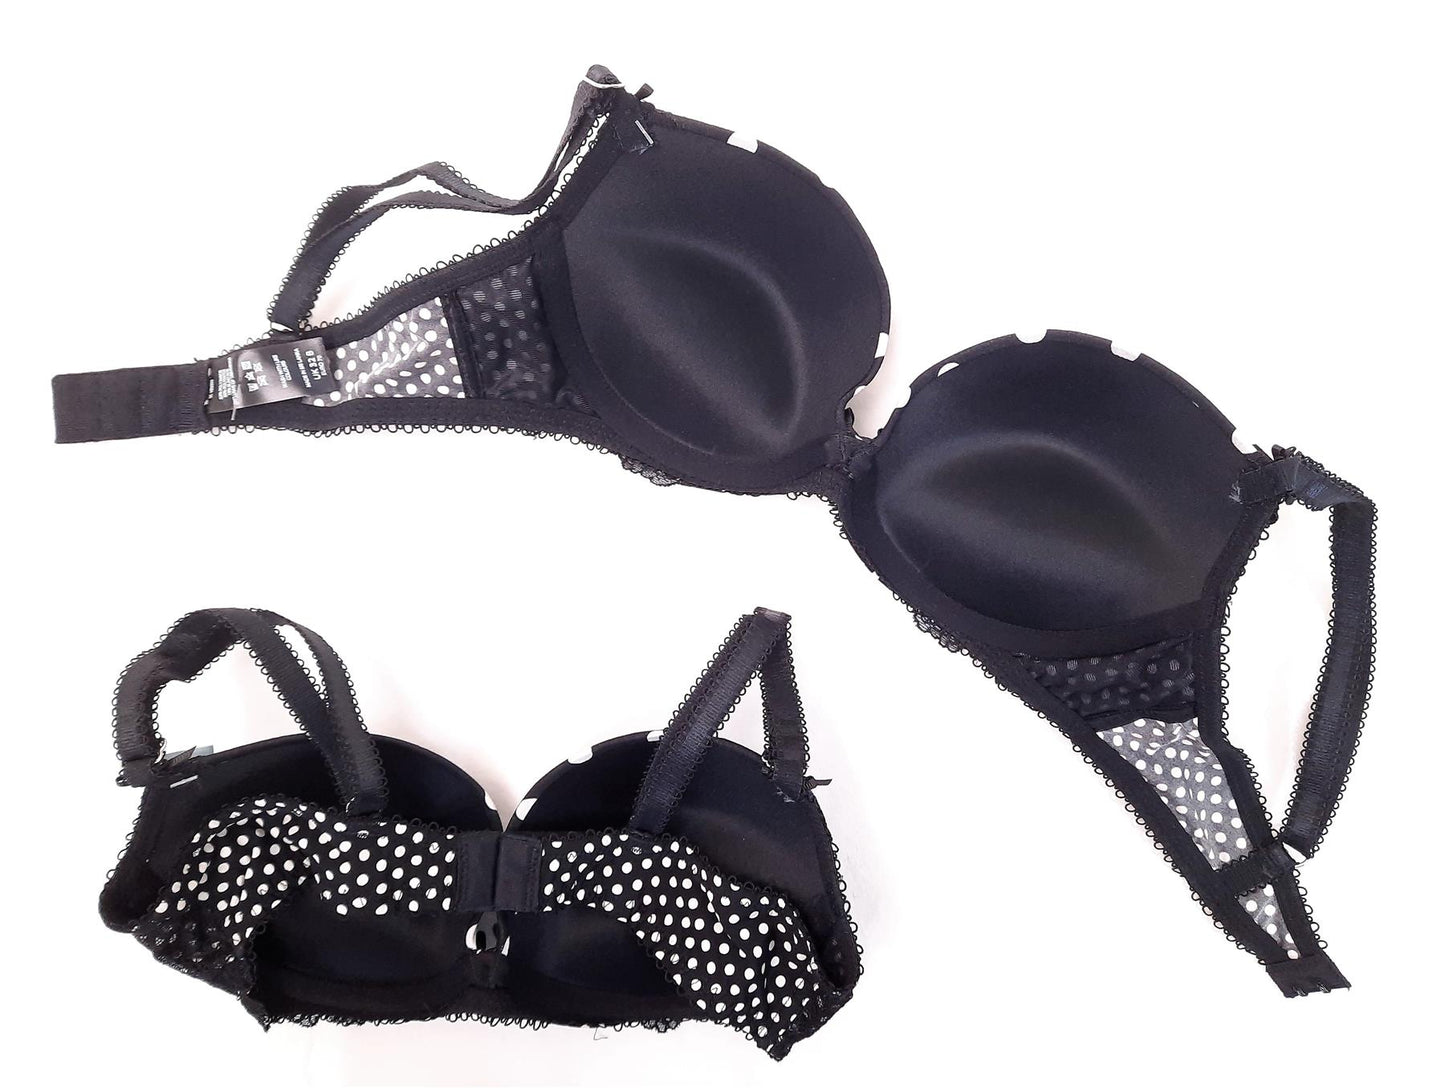 2pk Boux Avenue Bras Push-Up Plunge Underwired Polka Dot Multipack Brand New